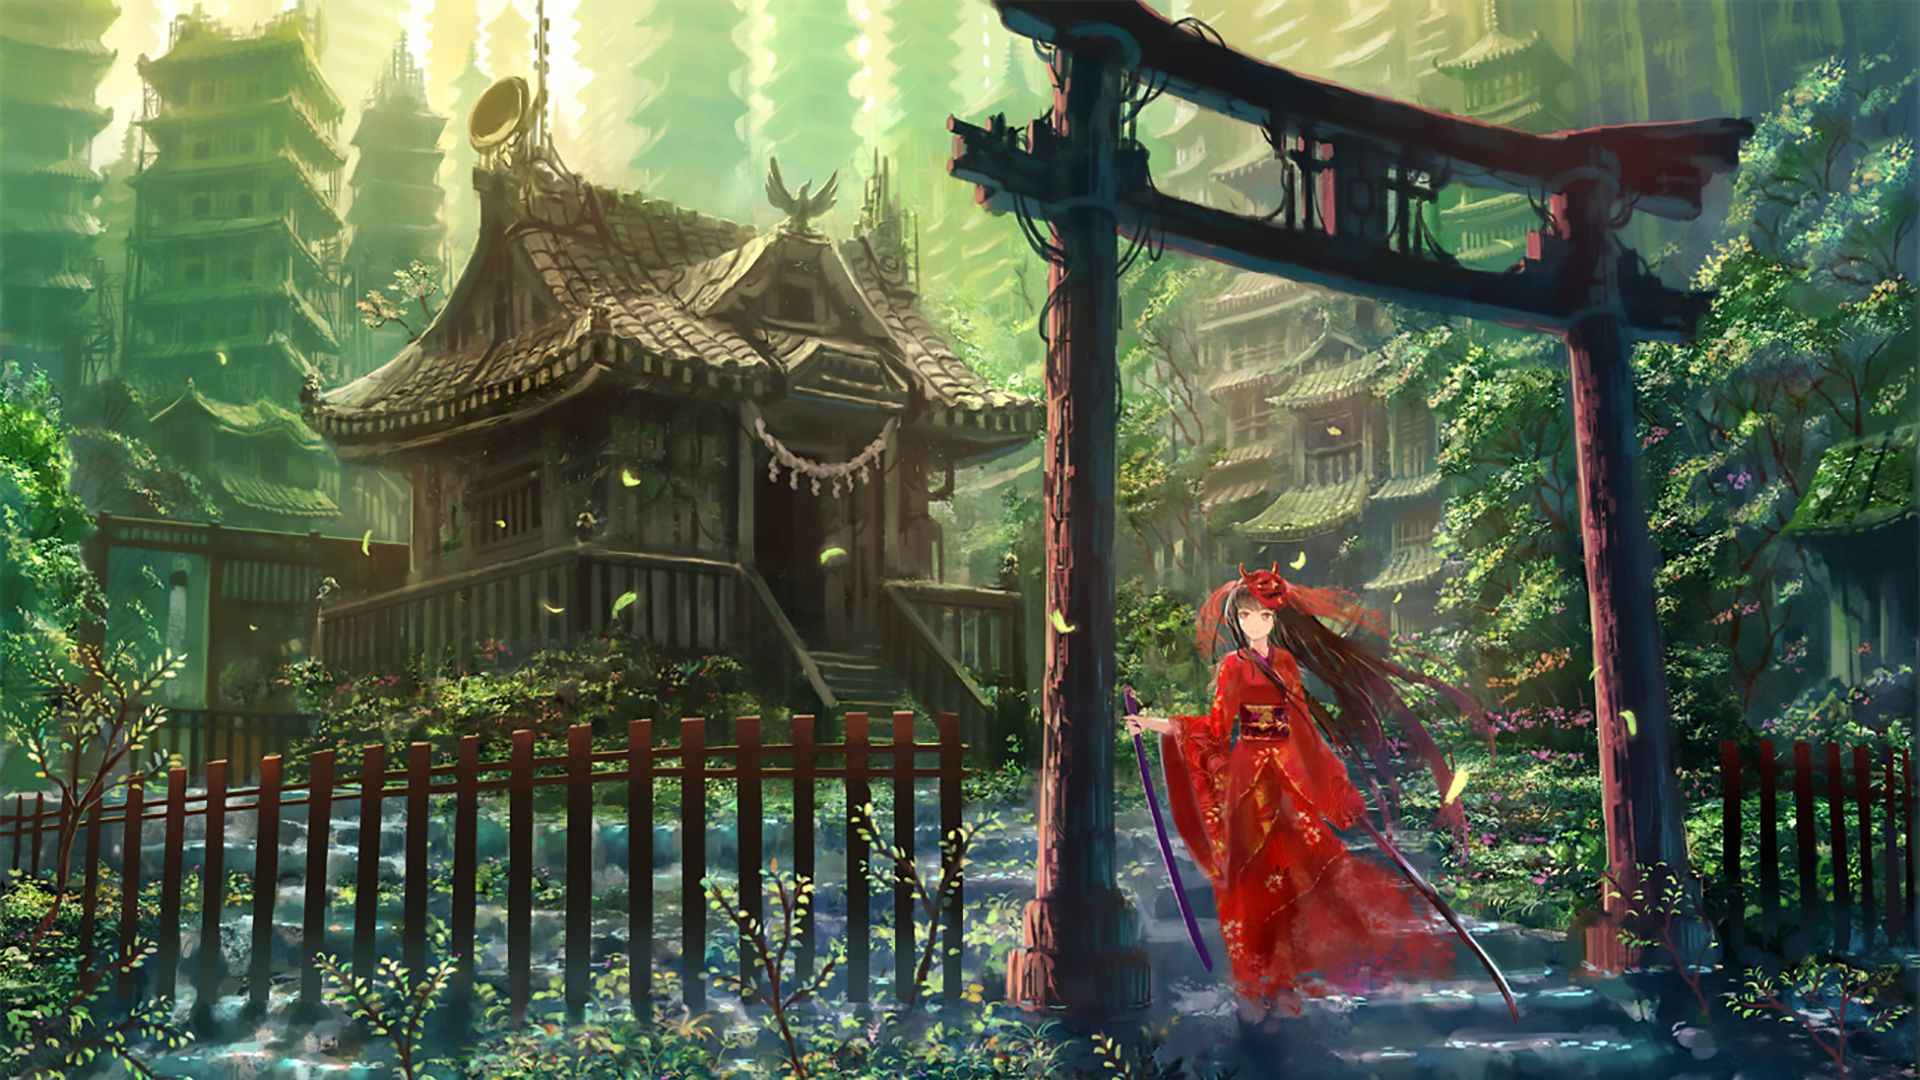 Anime temple by nasuss on DeviantArt